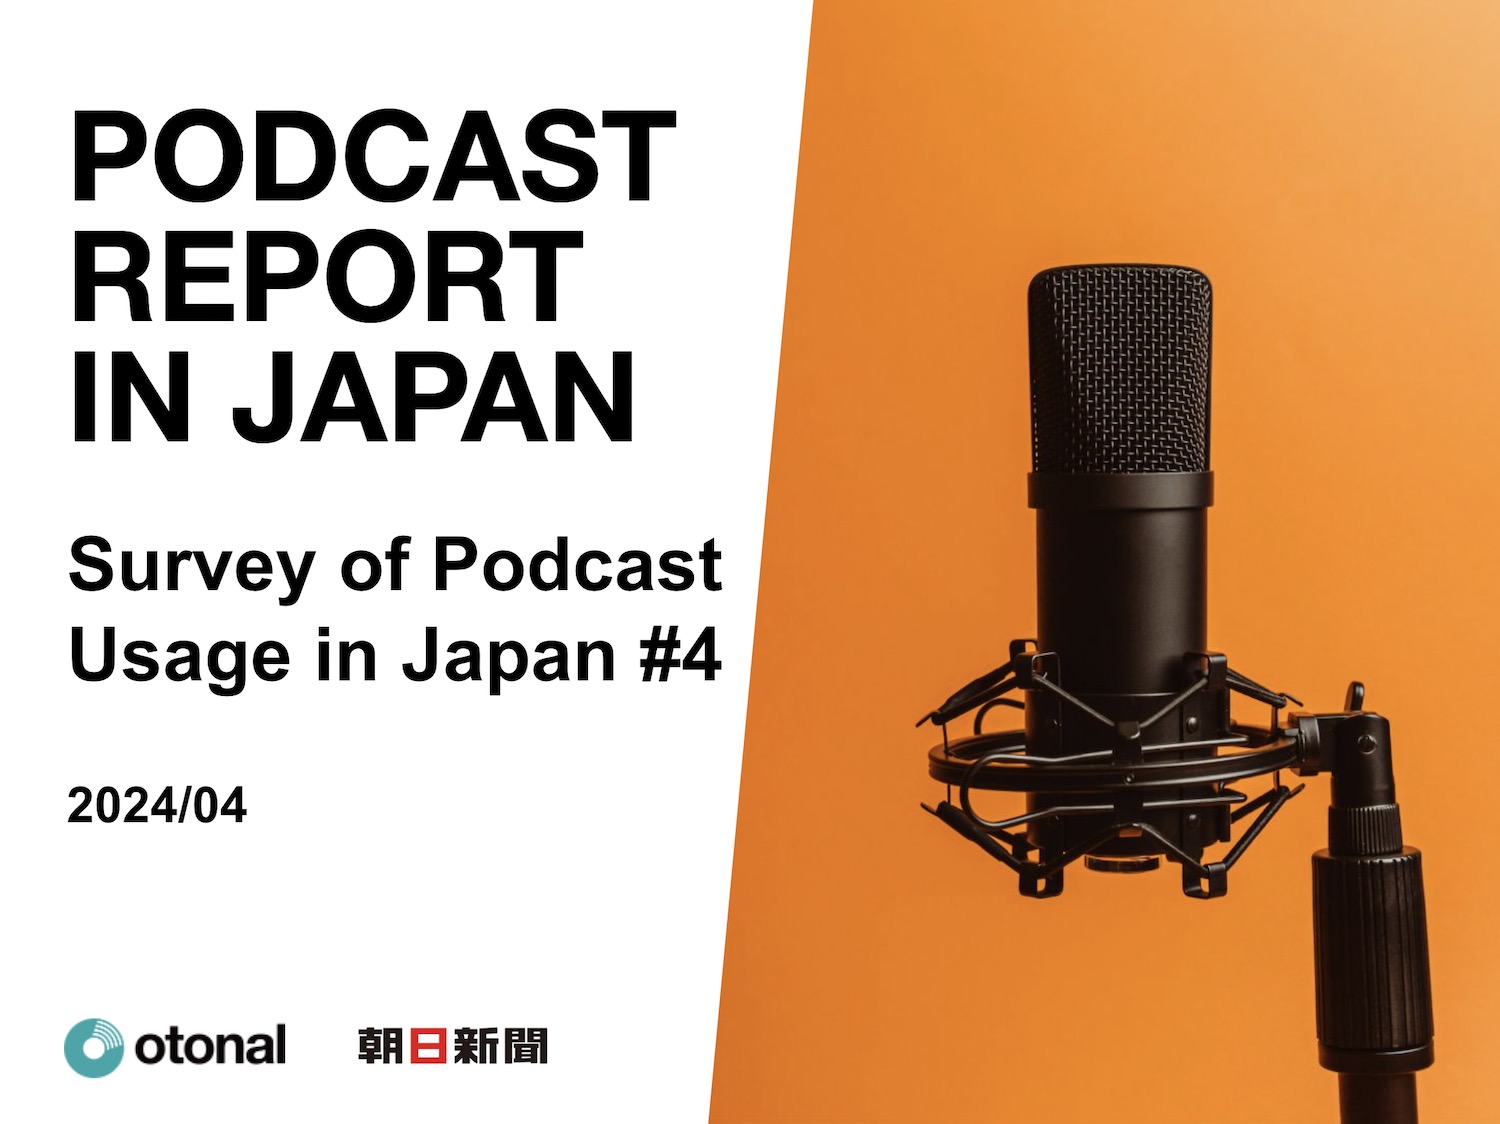 PODCAST REPORT IN JAPAN